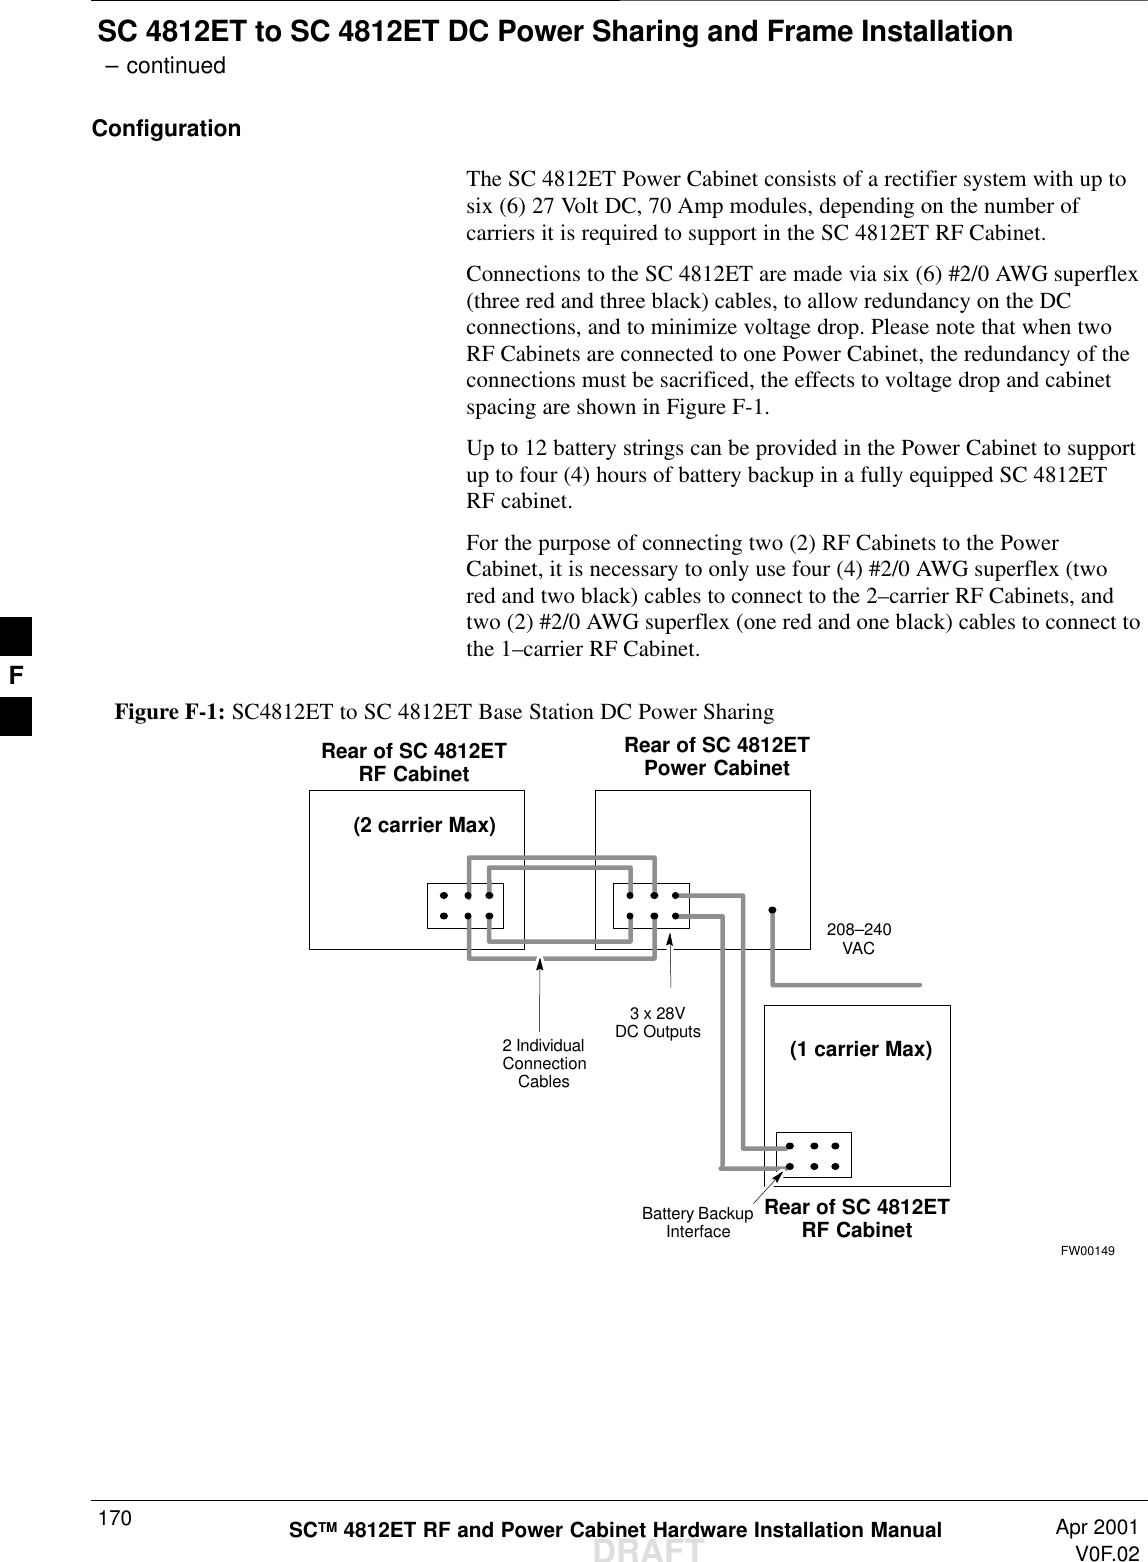 SC 4812ET to SC 4812ET DC Power Sharing and Frame Installation – continuedDRAFTSCTM 4812ET RF and Power Cabinet Hardware Installation Manual Apr 2001V0F.02170ConfigurationThe SC 4812ET Power Cabinet consists of a rectifier system with up tosix (6) 27 Volt DC, 70 Amp modules, depending on the number ofcarriers it is required to support in the SC 4812ET RF Cabinet.Connections to the SC 4812ET are made via six (6) #2/0 AWG superflex(three red and three black) cables, to allow redundancy on the DCconnections, and to minimize voltage drop. Please note that when twoRF Cabinets are connected to one Power Cabinet, the redundancy of theconnections must be sacrificed, the effects to voltage drop and cabinetspacing are shown in Figure F-1.Up to 12 battery strings can be provided in the Power Cabinet to supportup to four (4) hours of battery backup in a fully equipped SC 4812ETRF cabinet.For the purpose of connecting two (2) RF Cabinets to the PowerCabinet, it is necessary to only use four (4) #2/0 AWG superflex (twored and two black) cables to connect to the 2–carrier RF Cabinets, andtwo (2) #2/0 AWG superflex (one red and one black) cables to connect tothe 1–carrier RF Cabinet.FW00149Figure F-1: SC4812ET to SC 4812ET Base Station DC Power Sharing2 IndividualConnectionCables3 x 28VDC Outputs(2 carrier Max)Rear of SC 4812ETPower Cabinet(1 carrier Max)Battery BackupInterface208–240VACRear of SC 4812ETRF CabinetRear of SC 4812ETRF CabinetF